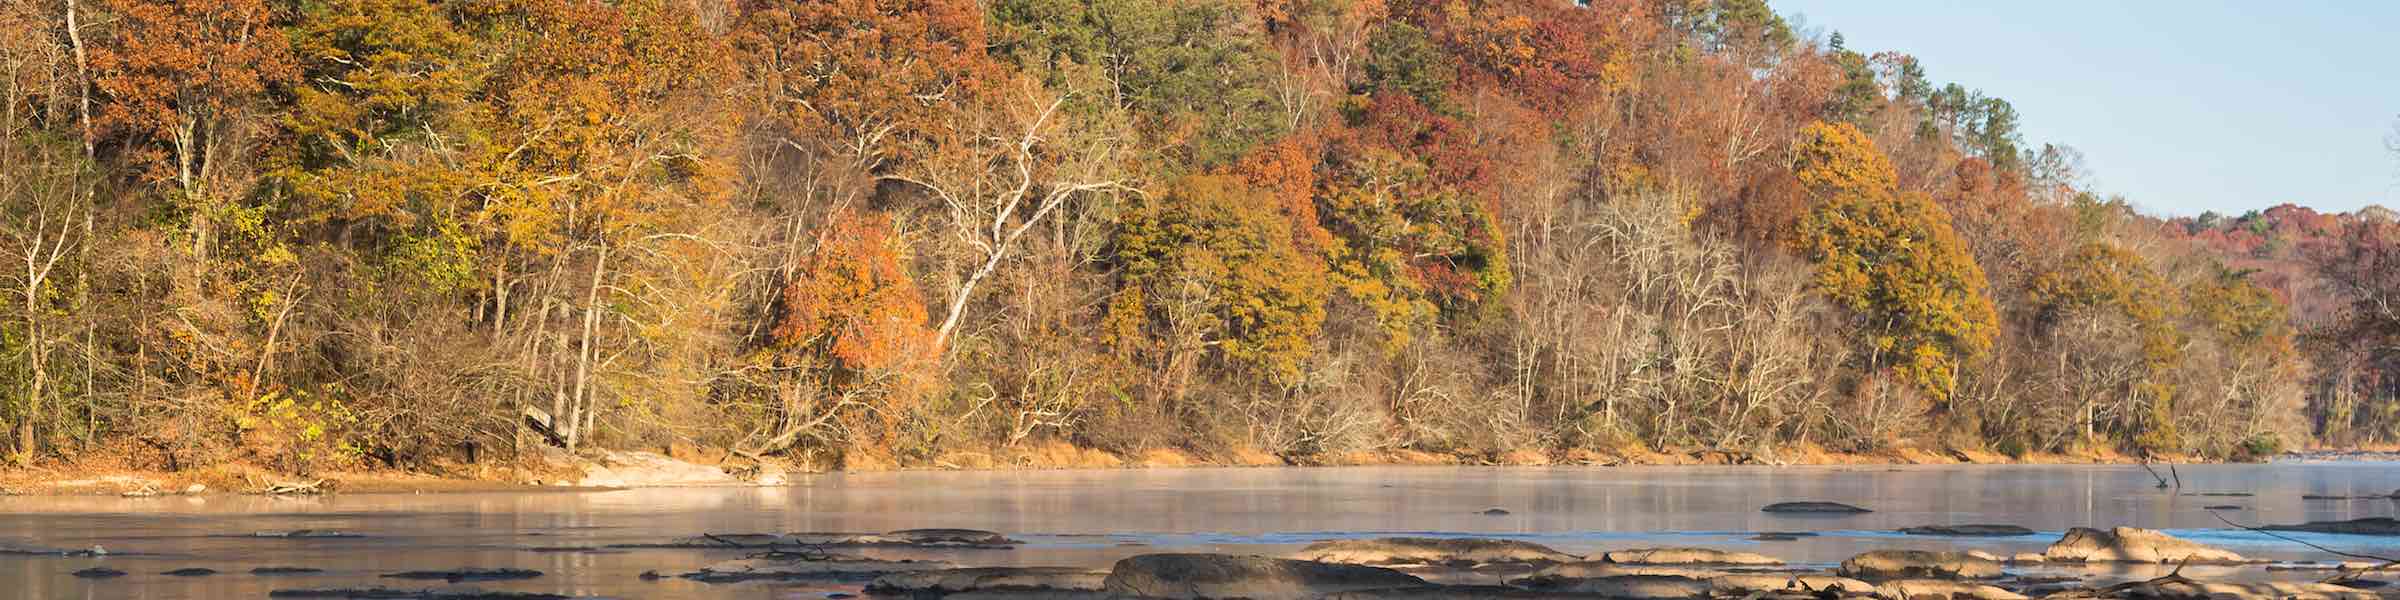 Autumnal view of the Chattahoochee River National Recreation Area.